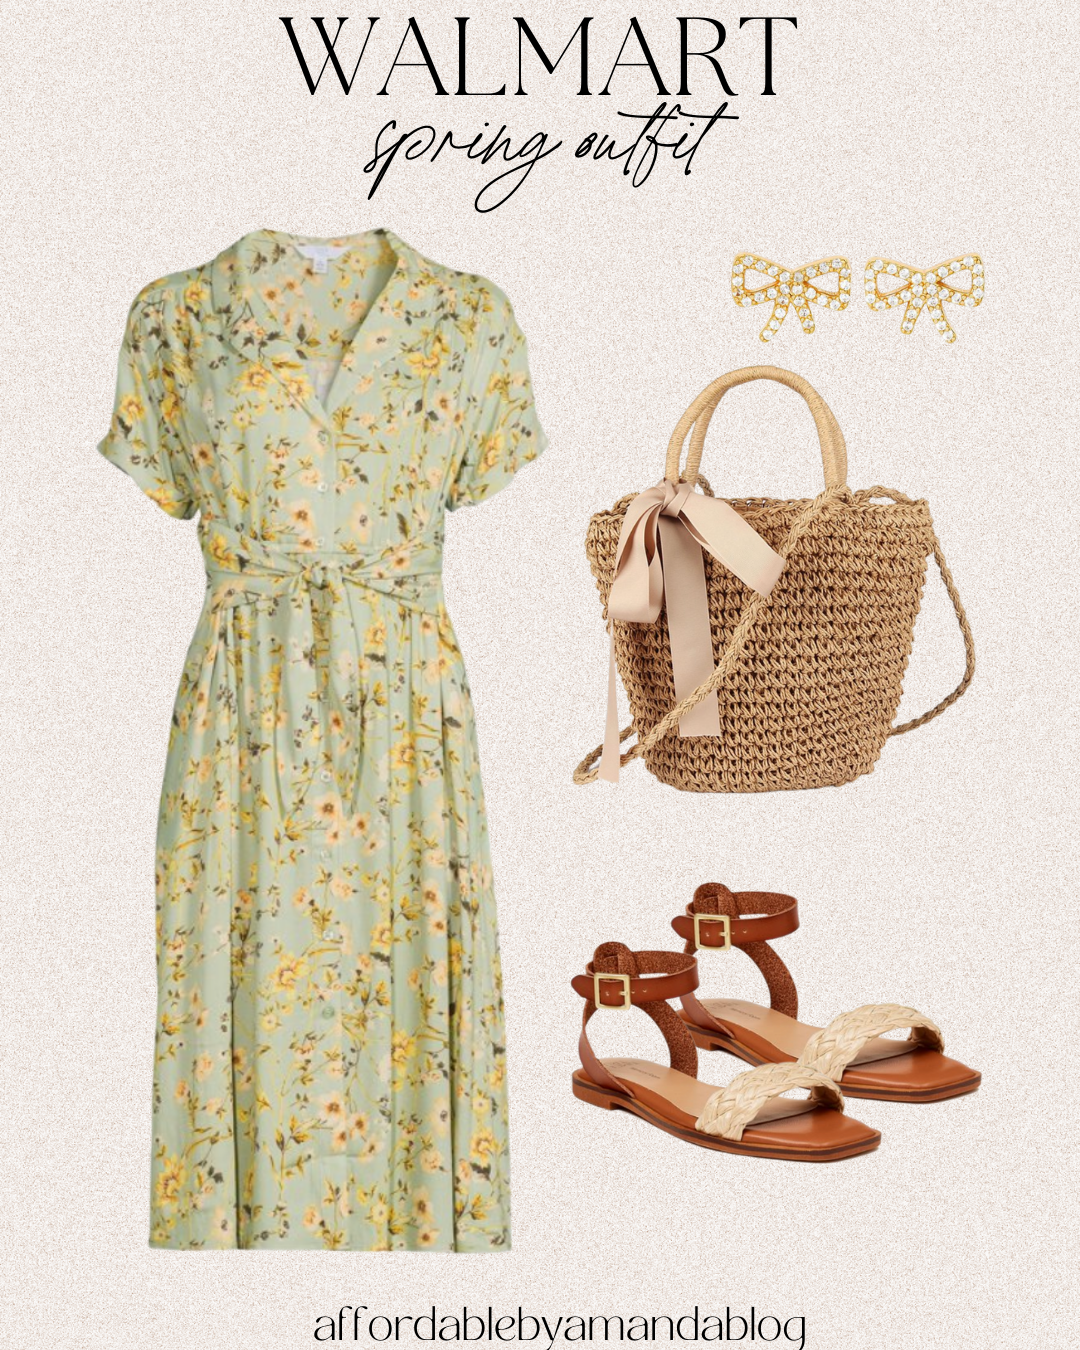 Green floral dress, brown ankle strap braided sandals, straw bag